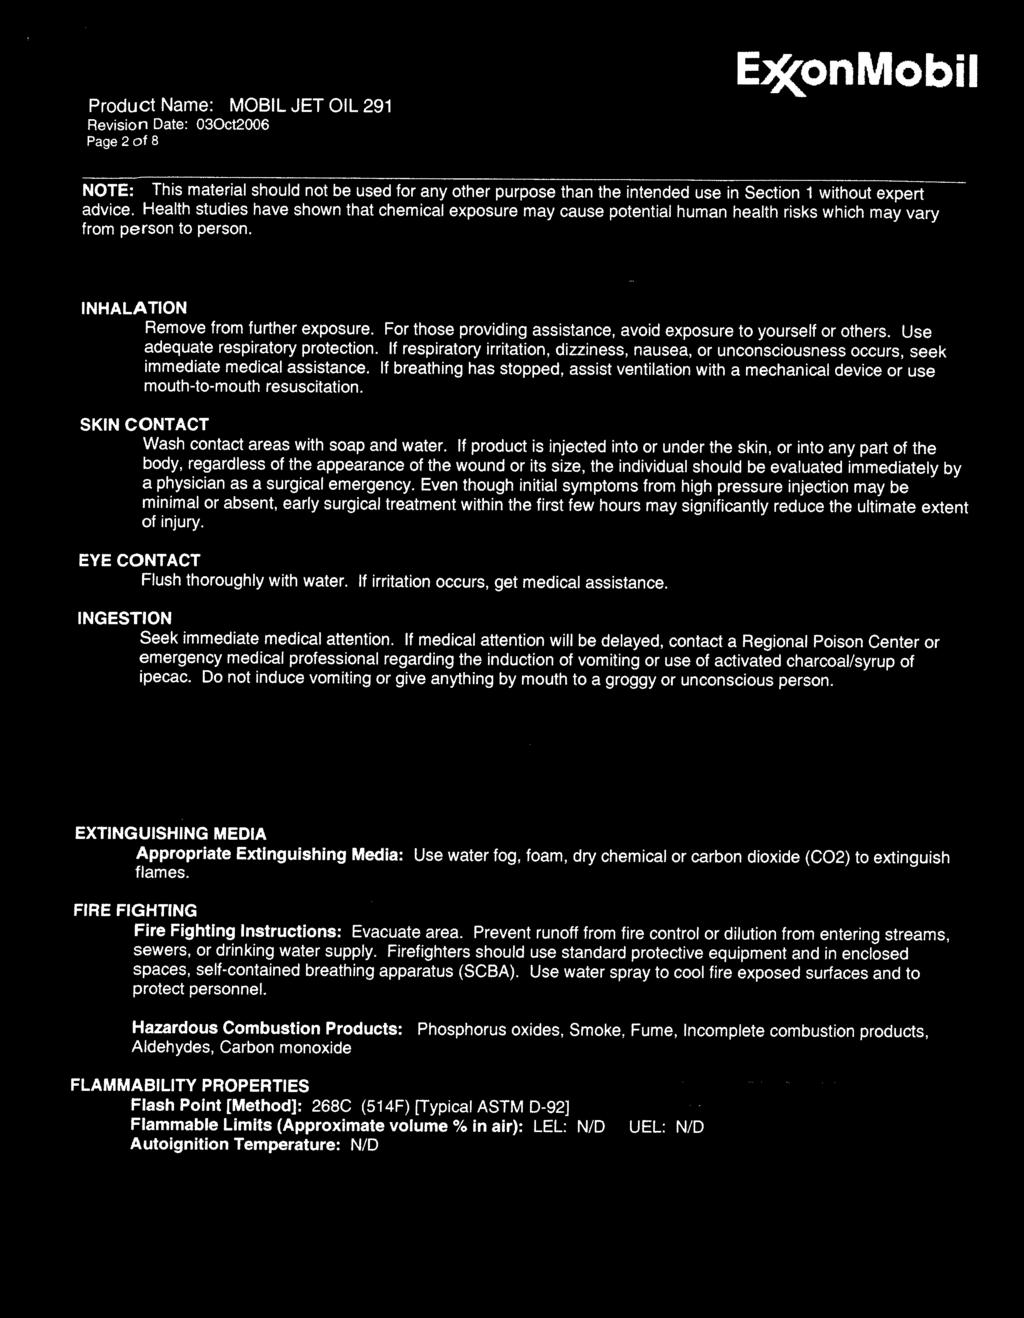 Page 2 of 8 EJf(onMobil NOTE: This material should not be used for any other purpose than the intended use in Section 1 without expert advice.